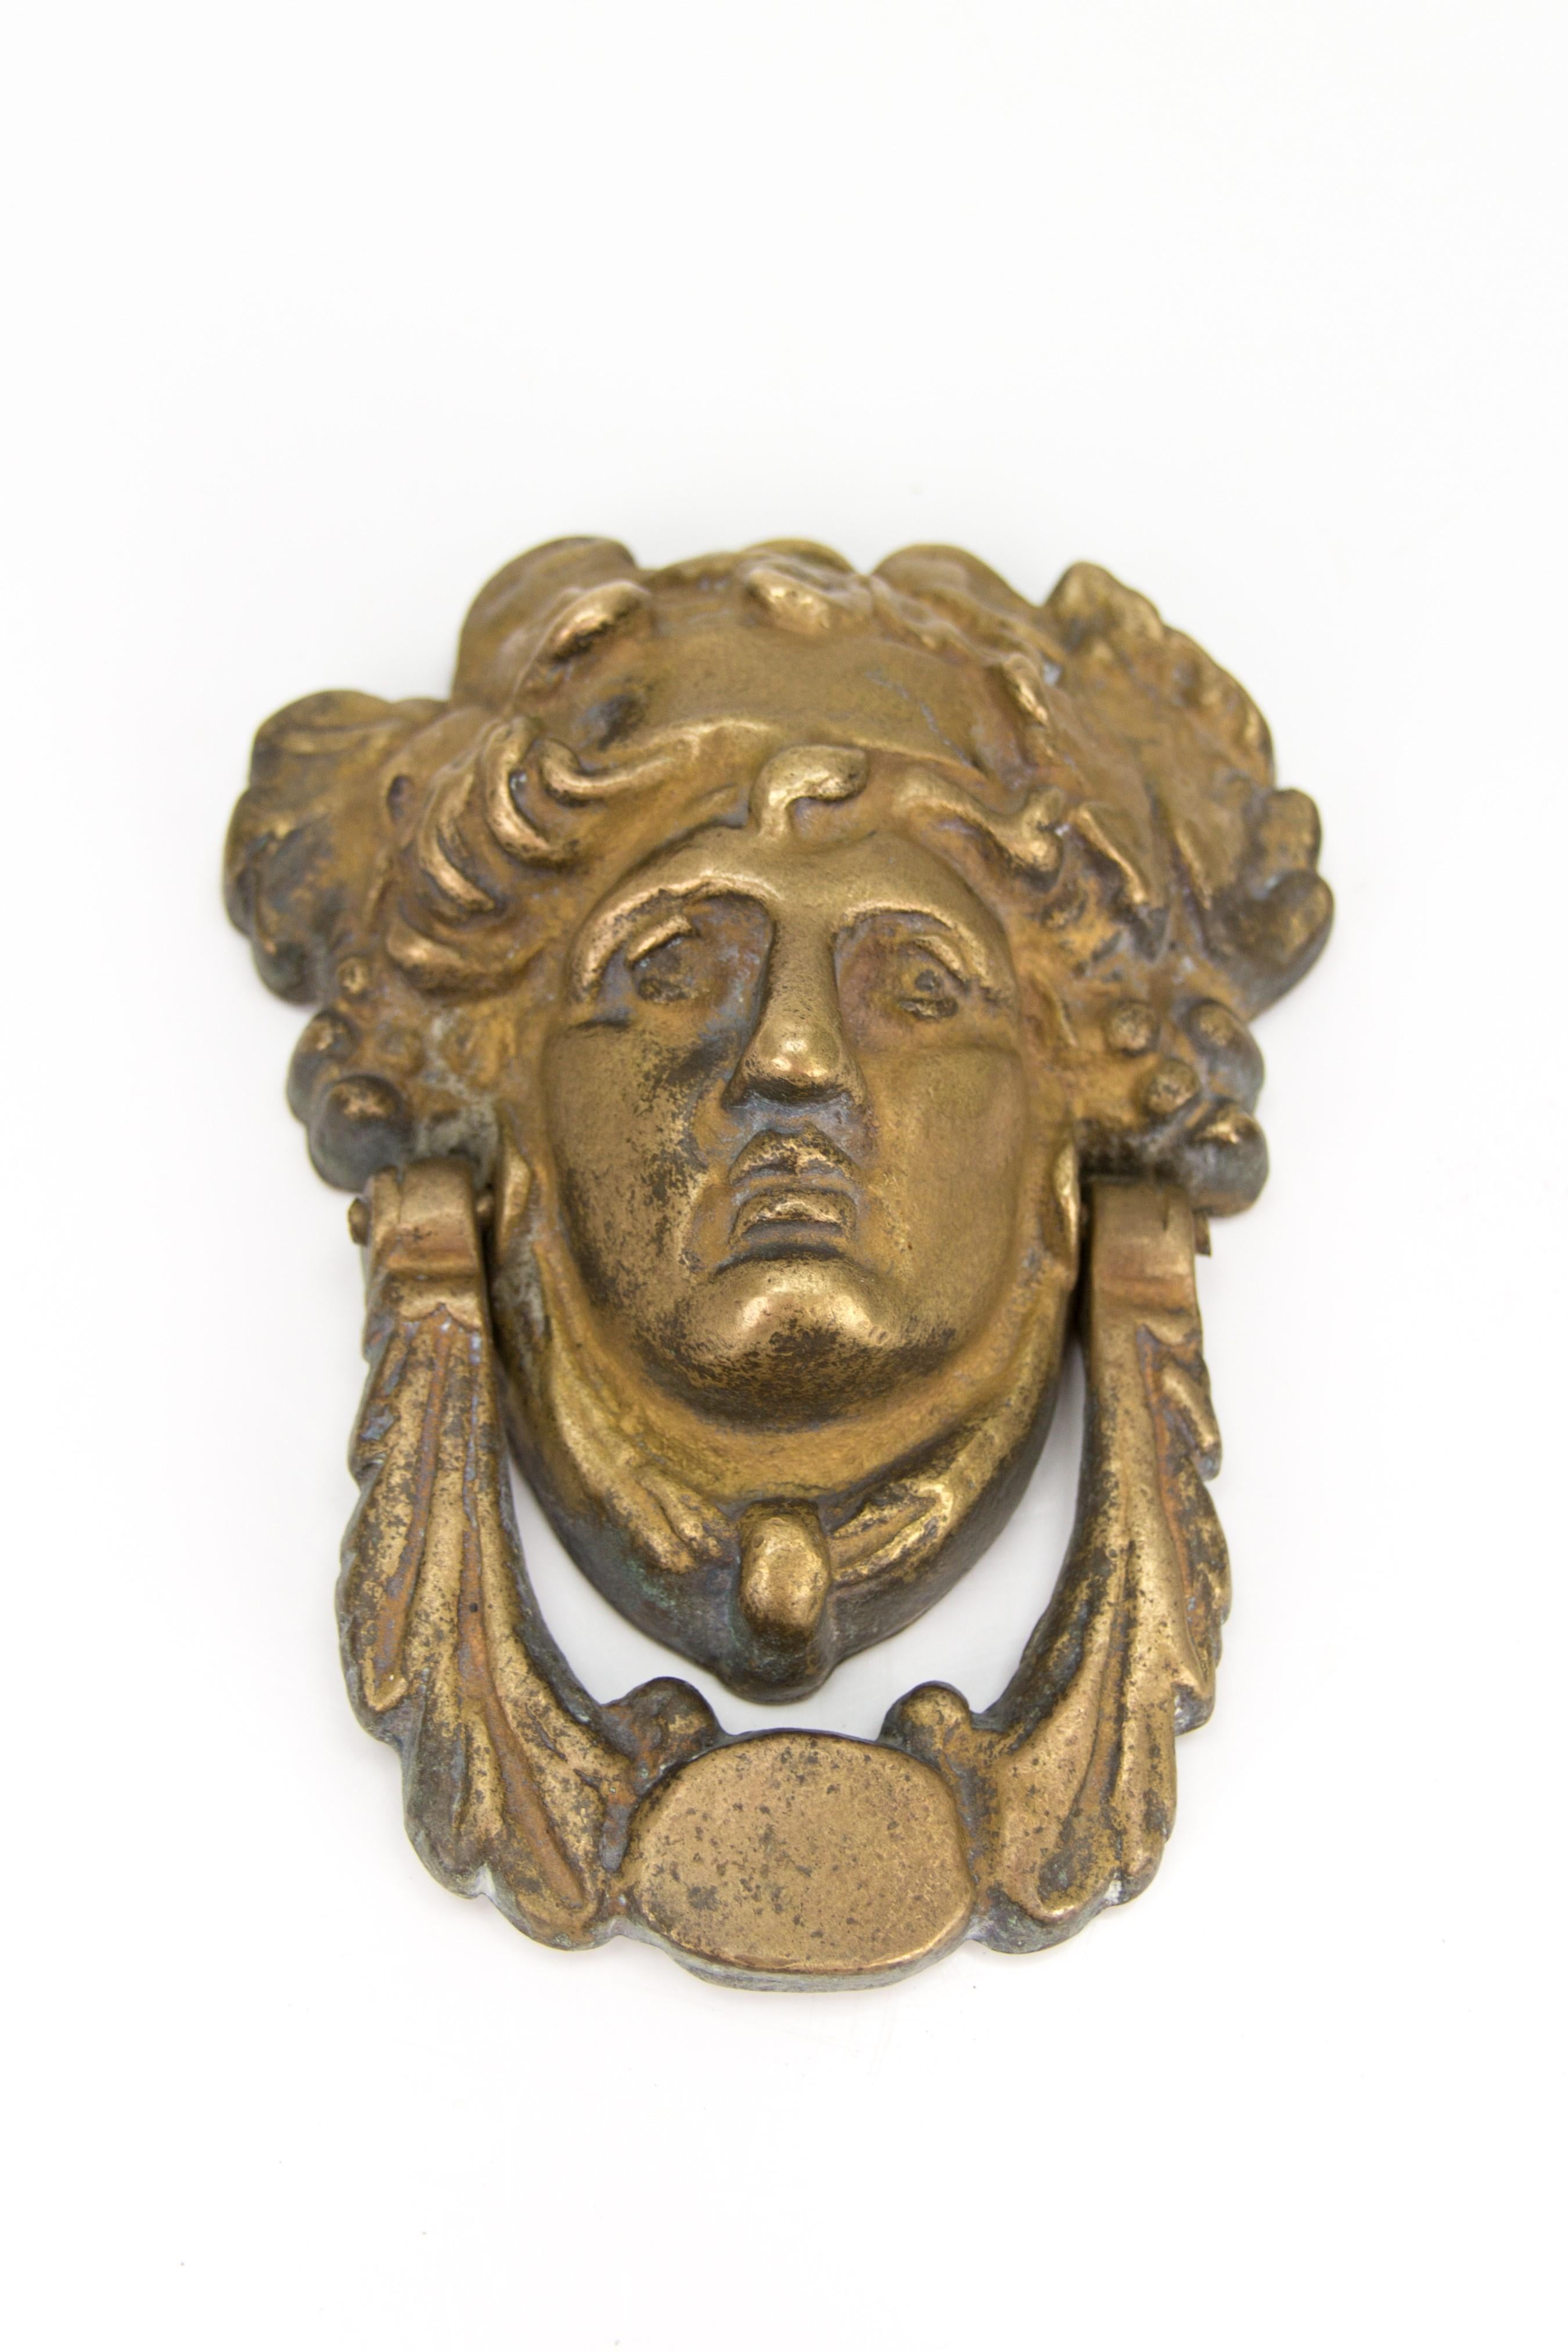 A large and imposing bronze Art Nouveau door knocker, which is weathered in the form of a classical lady’s face.
Dimensions: height 18 cm / 7.08 in, width 15 cm / 5.9 in, depth 5.5 cm / 2.16 in.